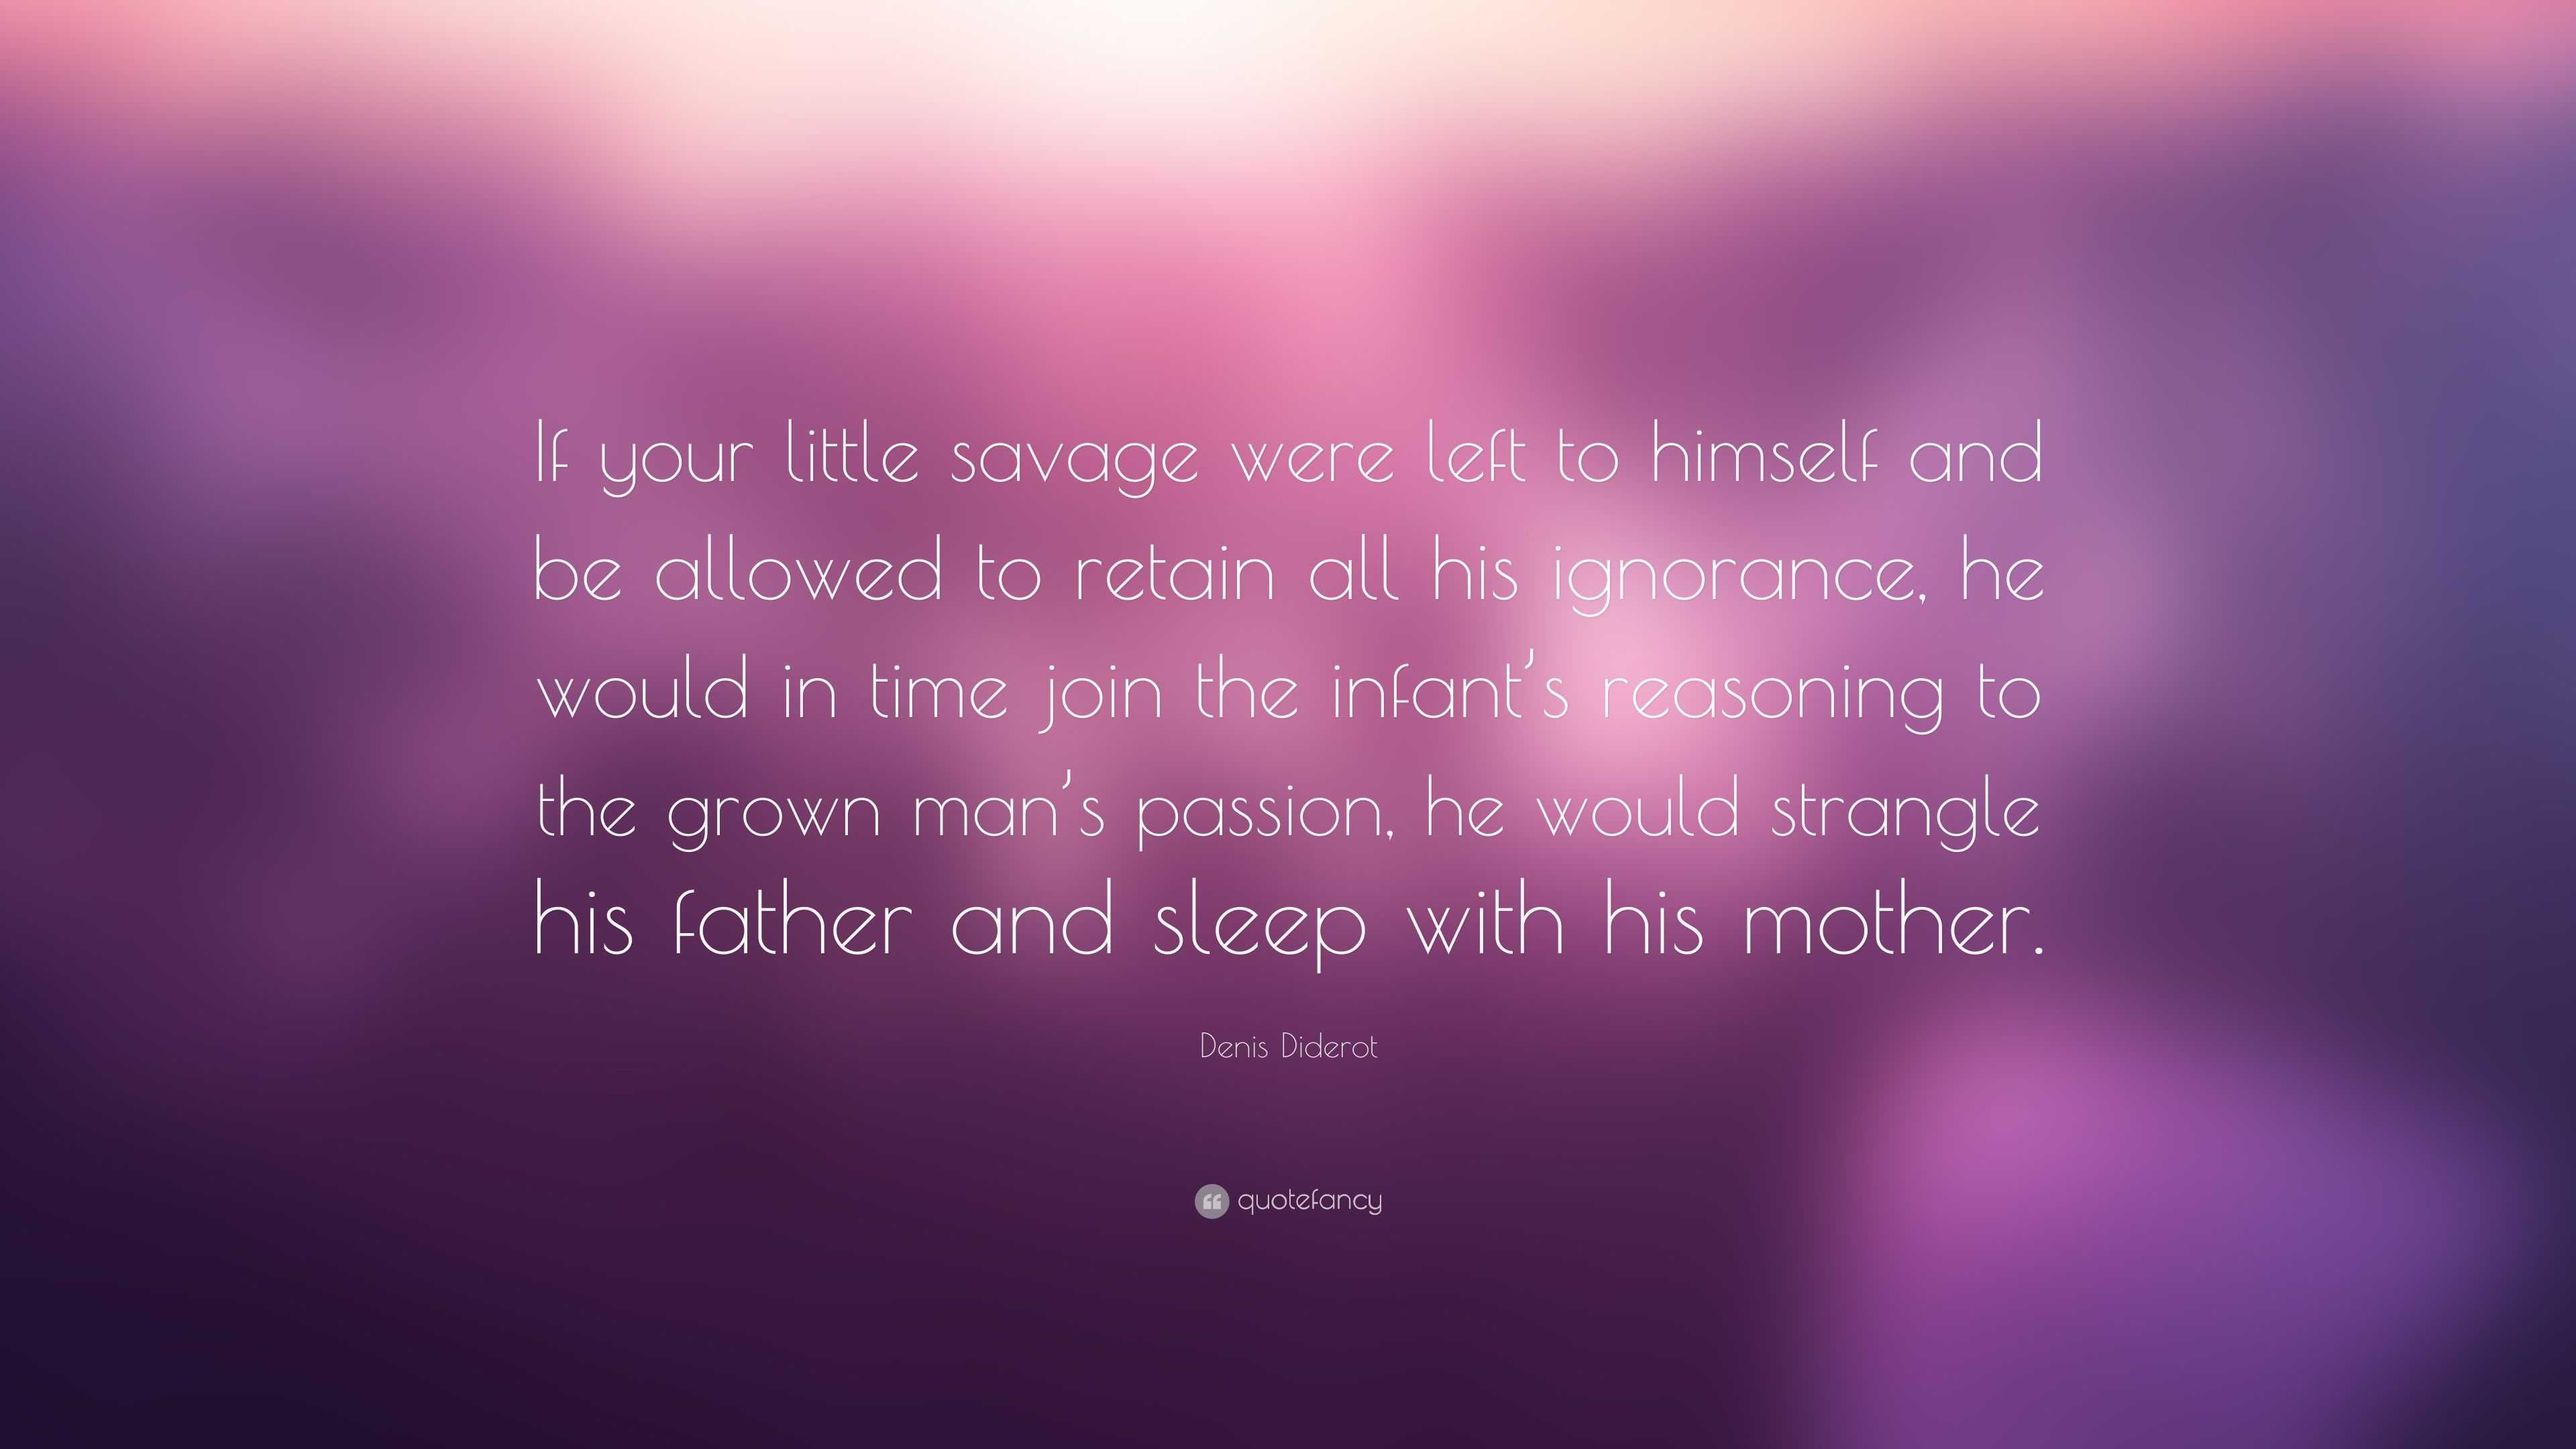 Denis Diderot Quote: “If your little savage were left to himself and be ...